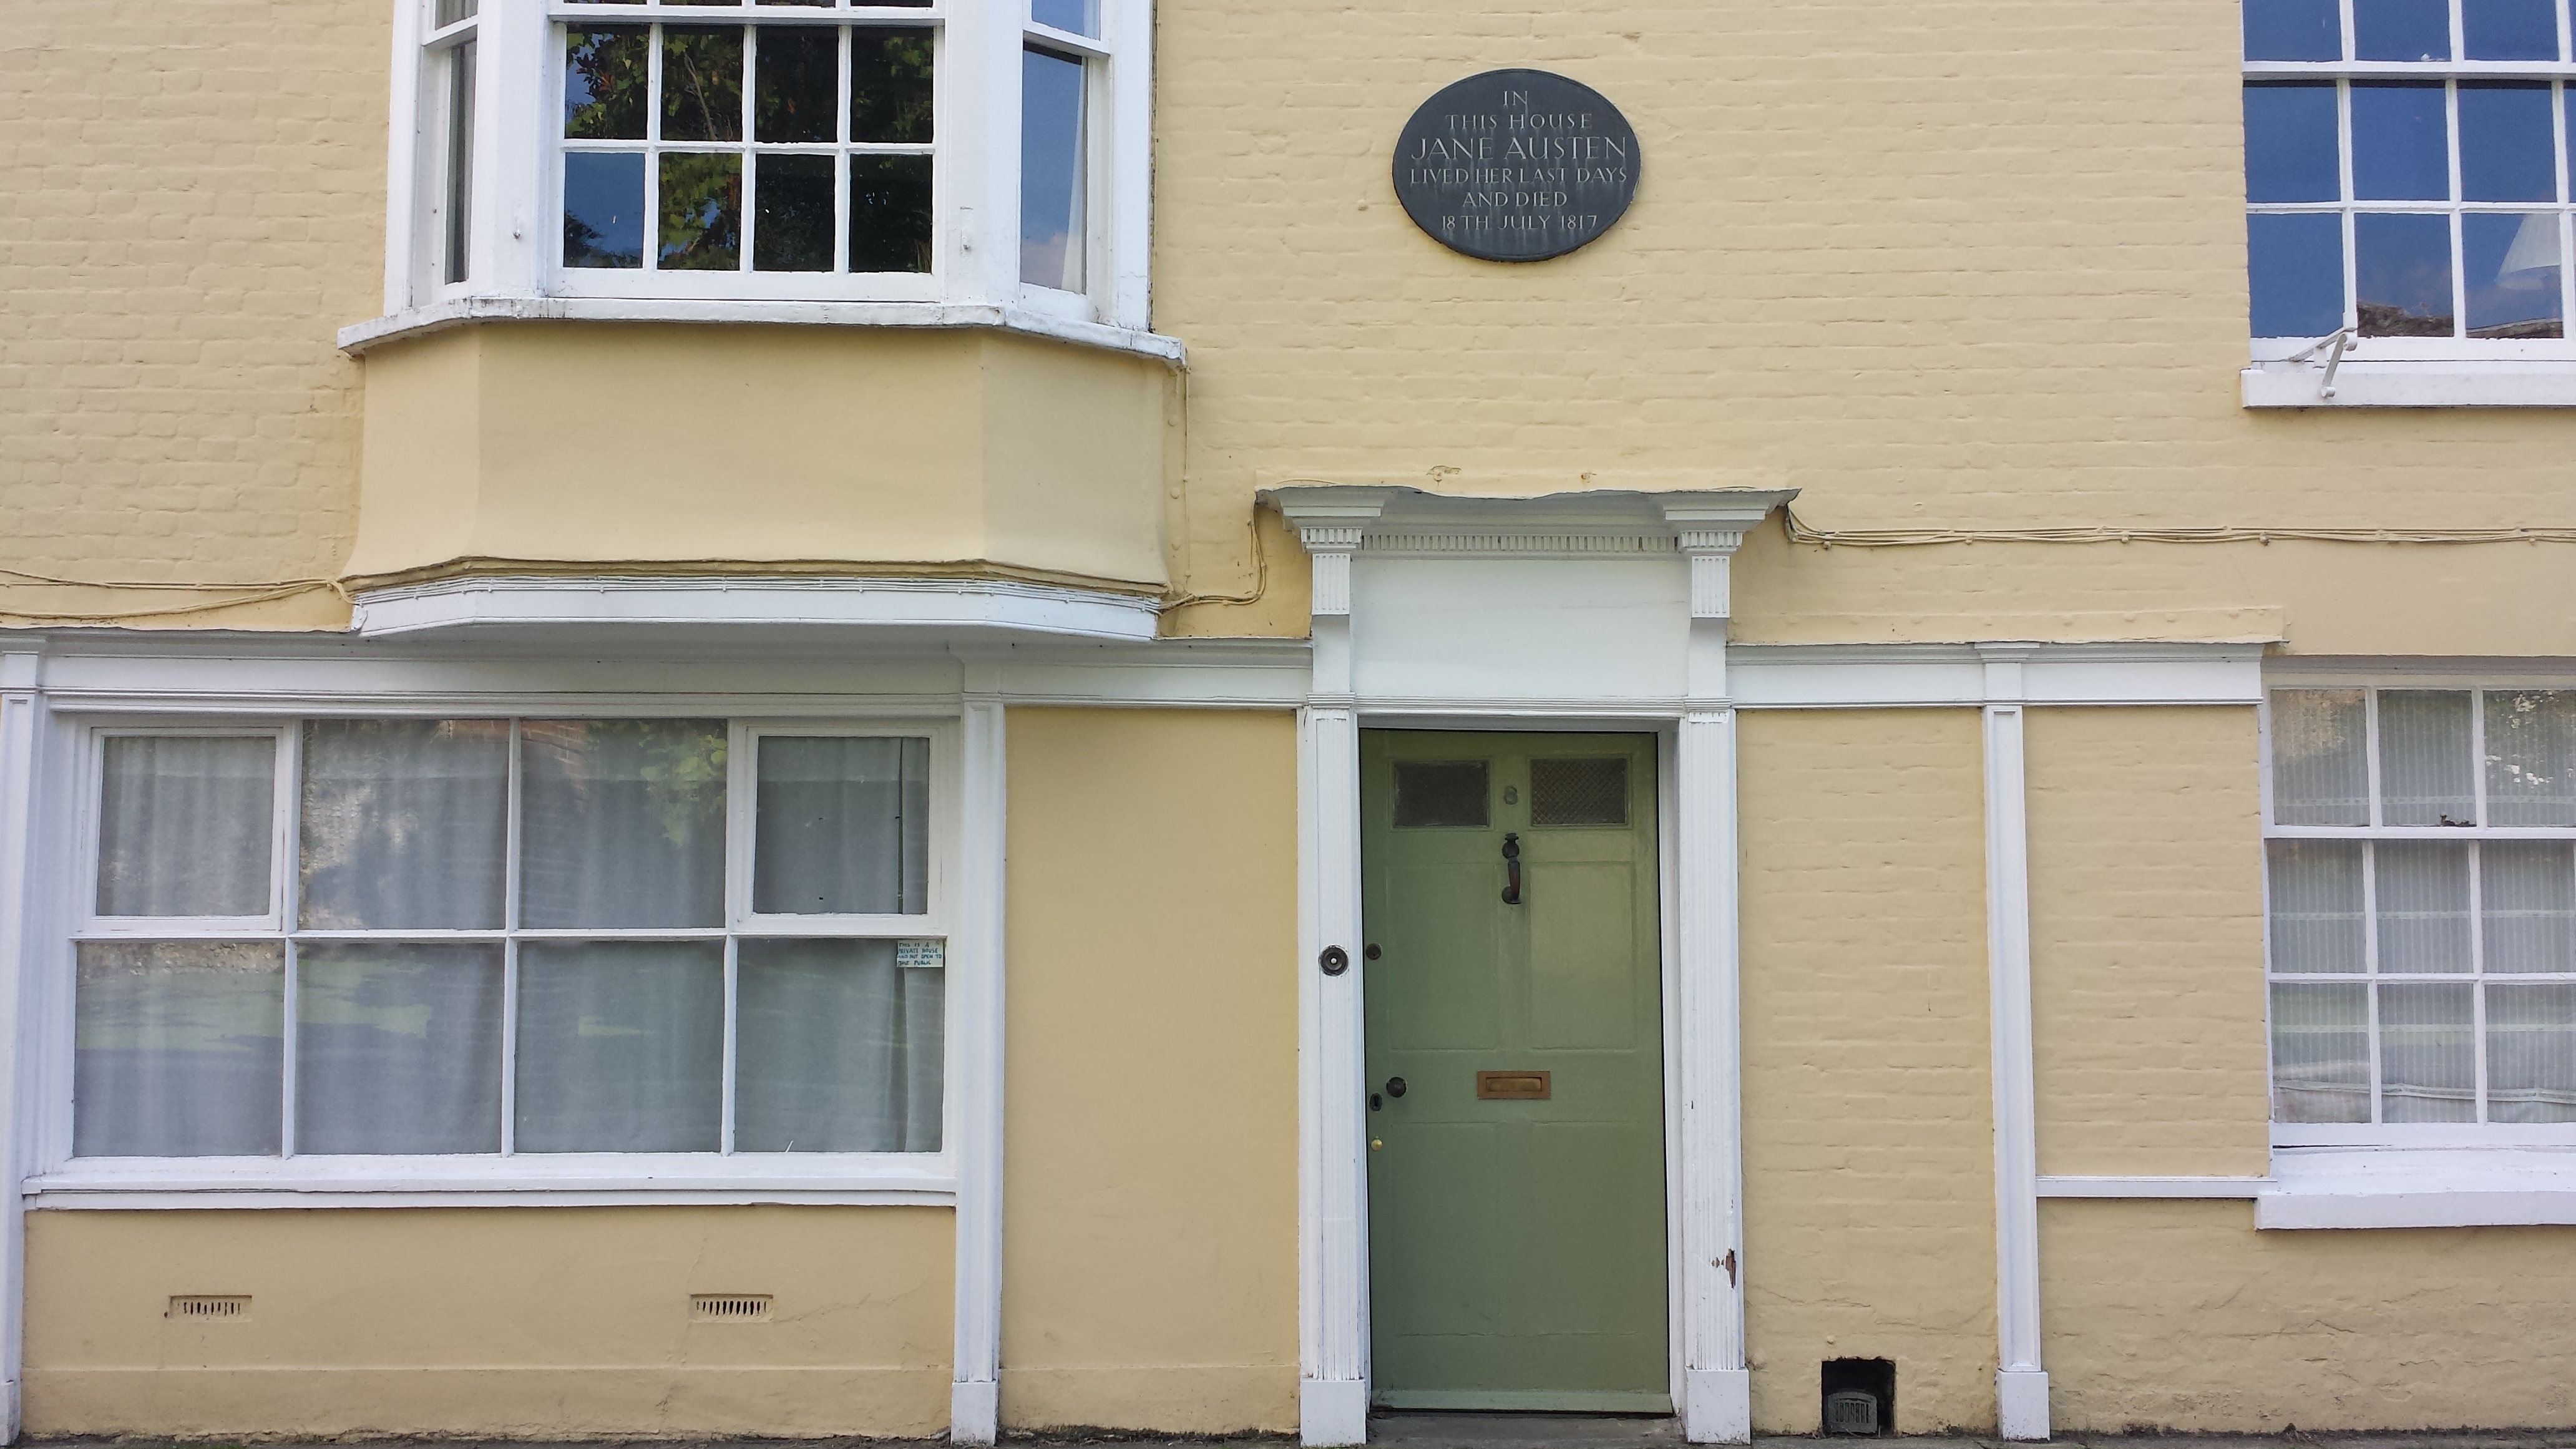 Facade of a small stone cottage with yellow painted walls and a fgreen front door, above the door a bronze plaque reads "in this house hane austen lived her last days and died"